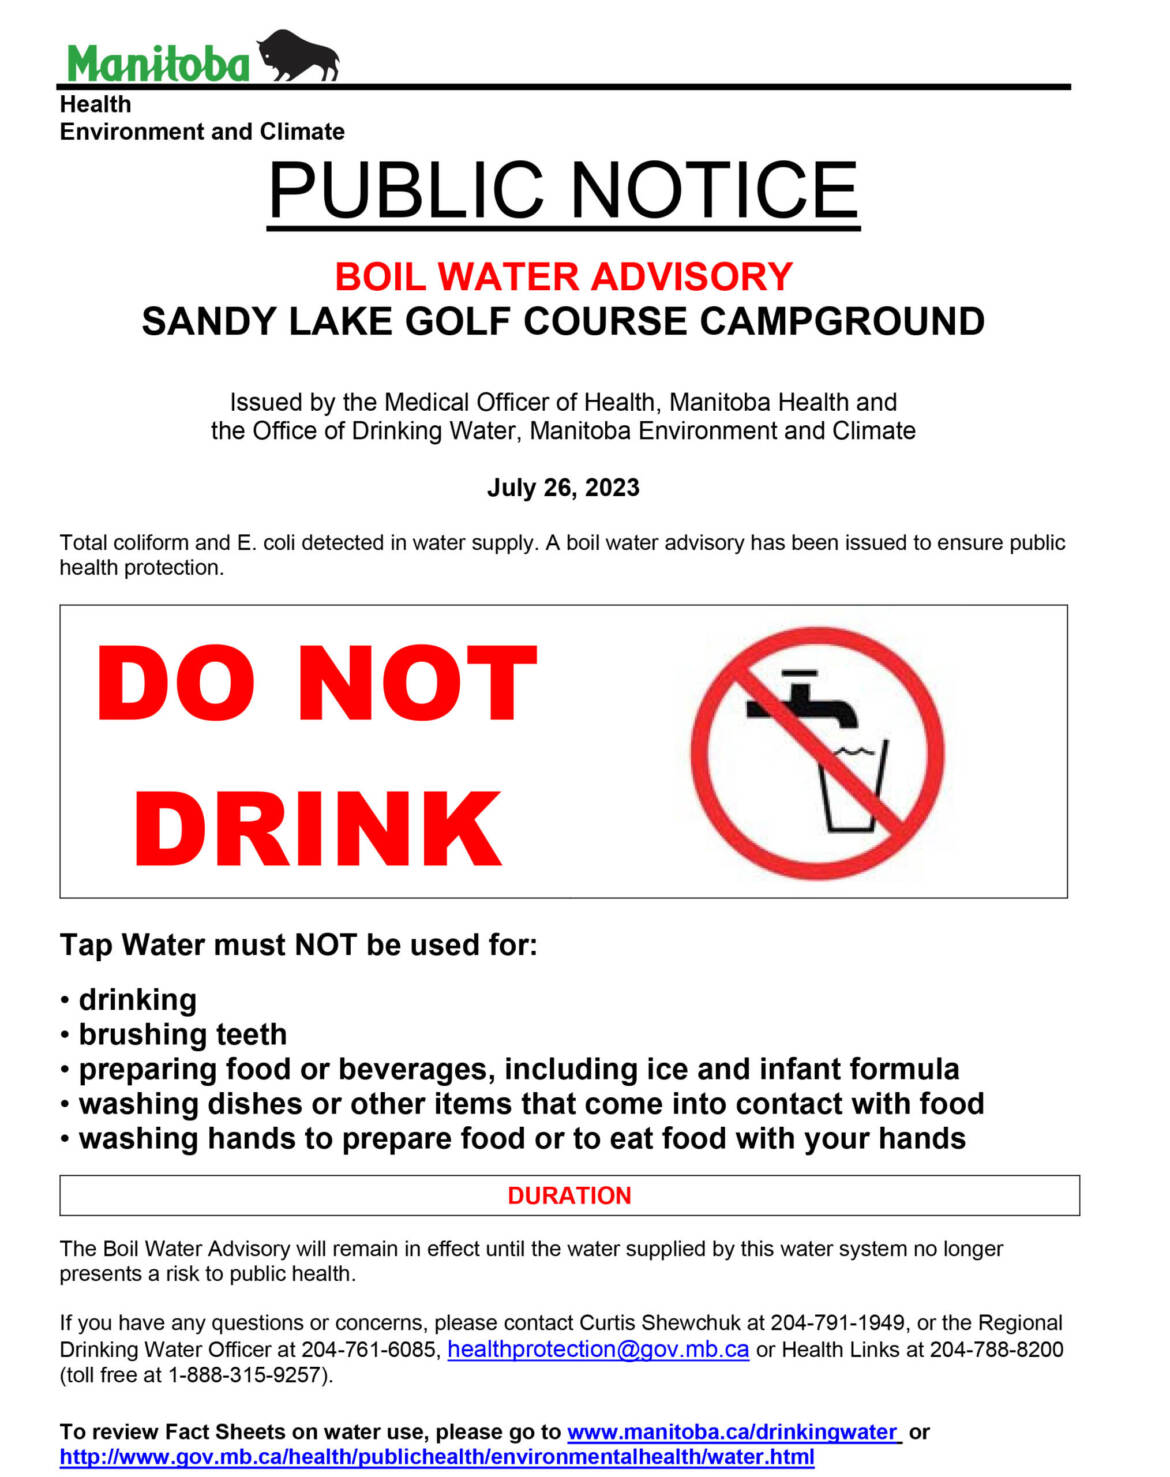 BWA-23-07-26-Sandy-Lake-Golf-Course-Campground-Notice-copy-scaled.jpg